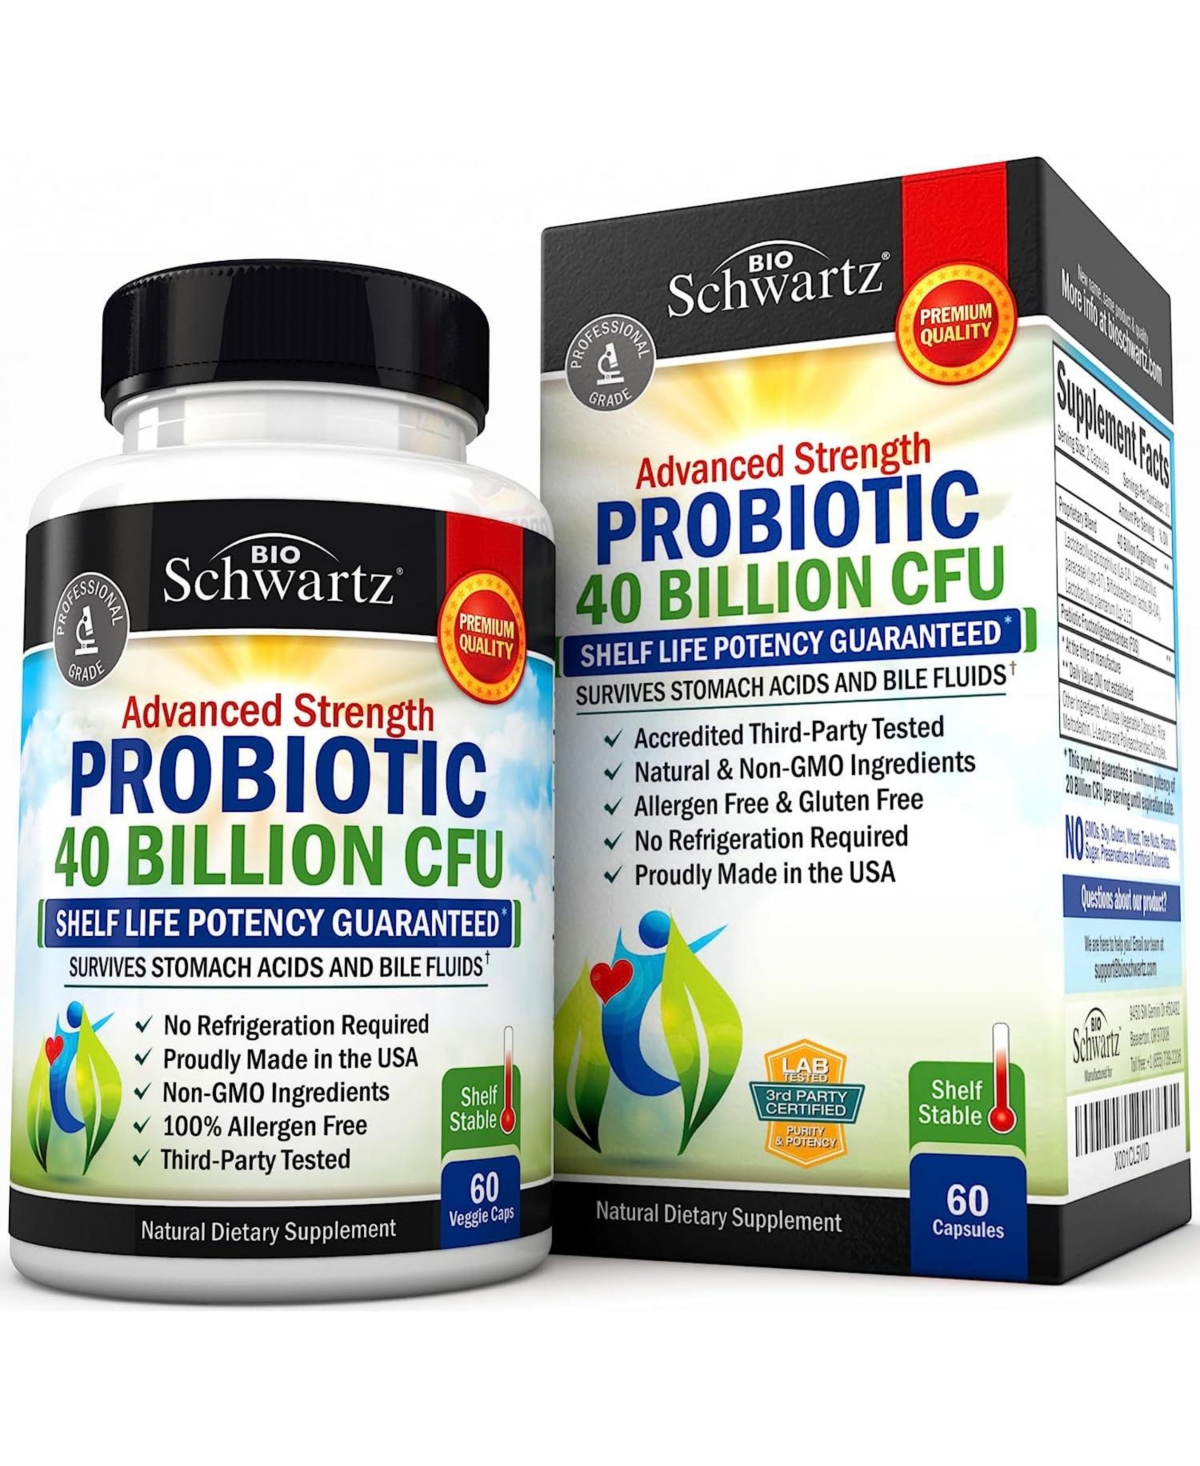 Daily Probiotic Supplement with 40 Billion Cfu - Gut Health Complex with Astragalus and Lactobacillus Acidophilus Probiotic for Women and Men - Shelf